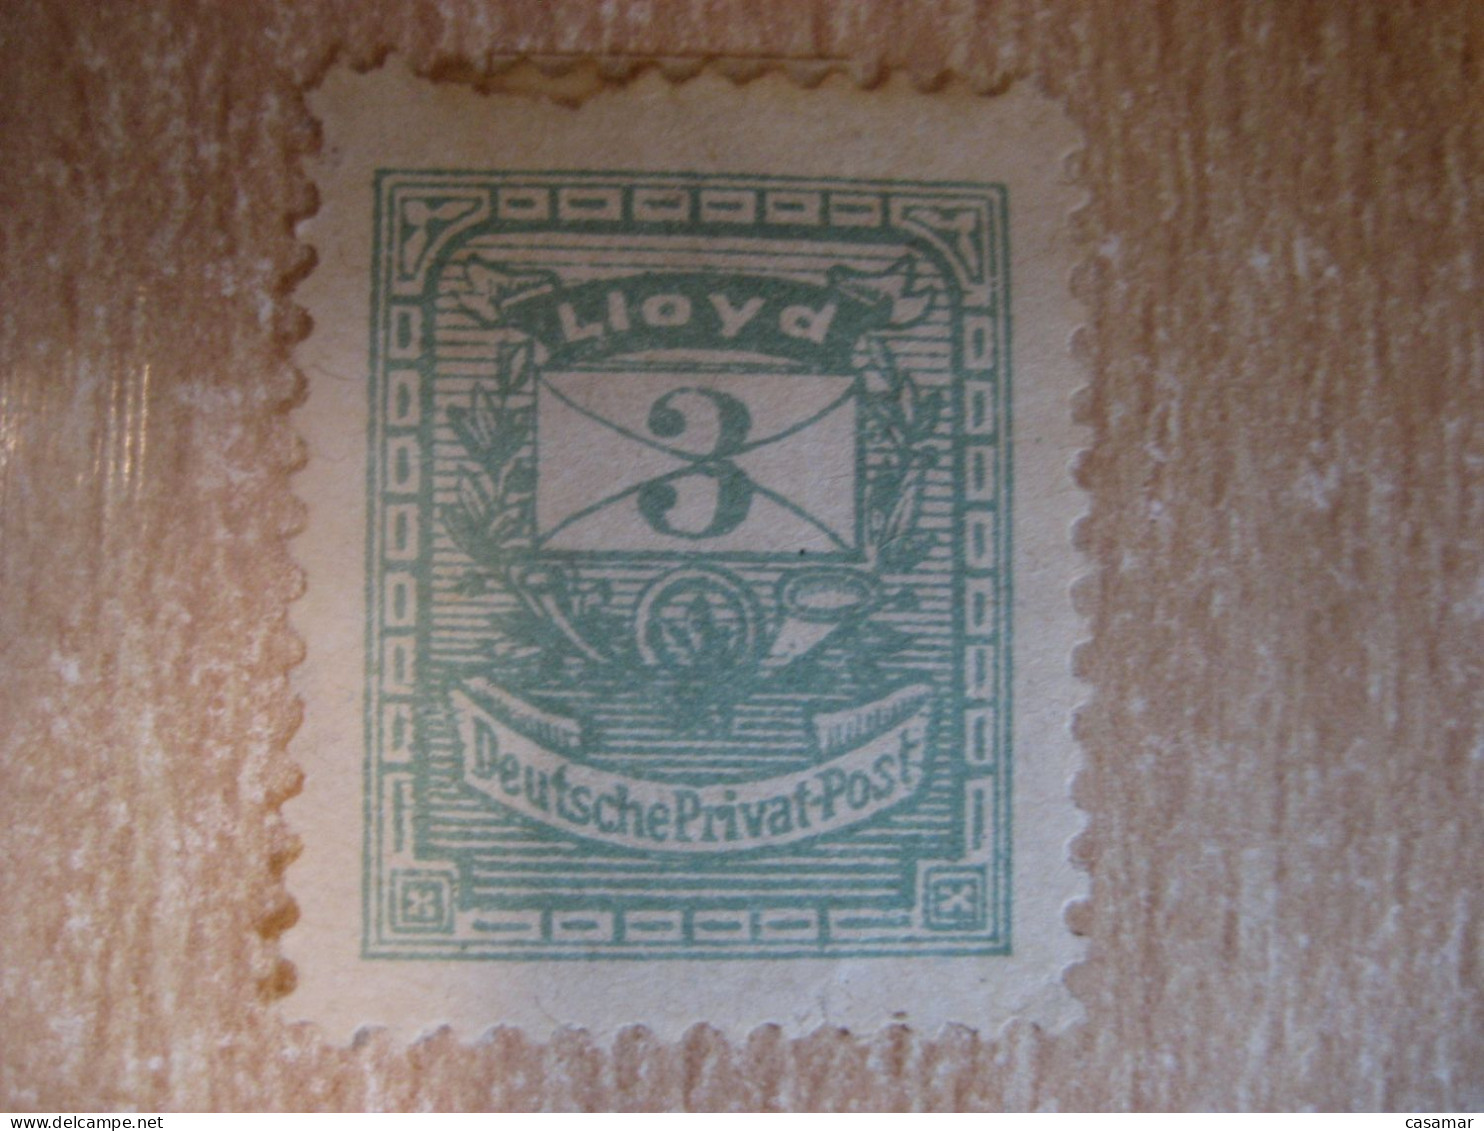 BERLIN 1886 Lloyd 3 Pf Privat Private Local Stamp GERMANY Slight Faults - Private & Local Mails